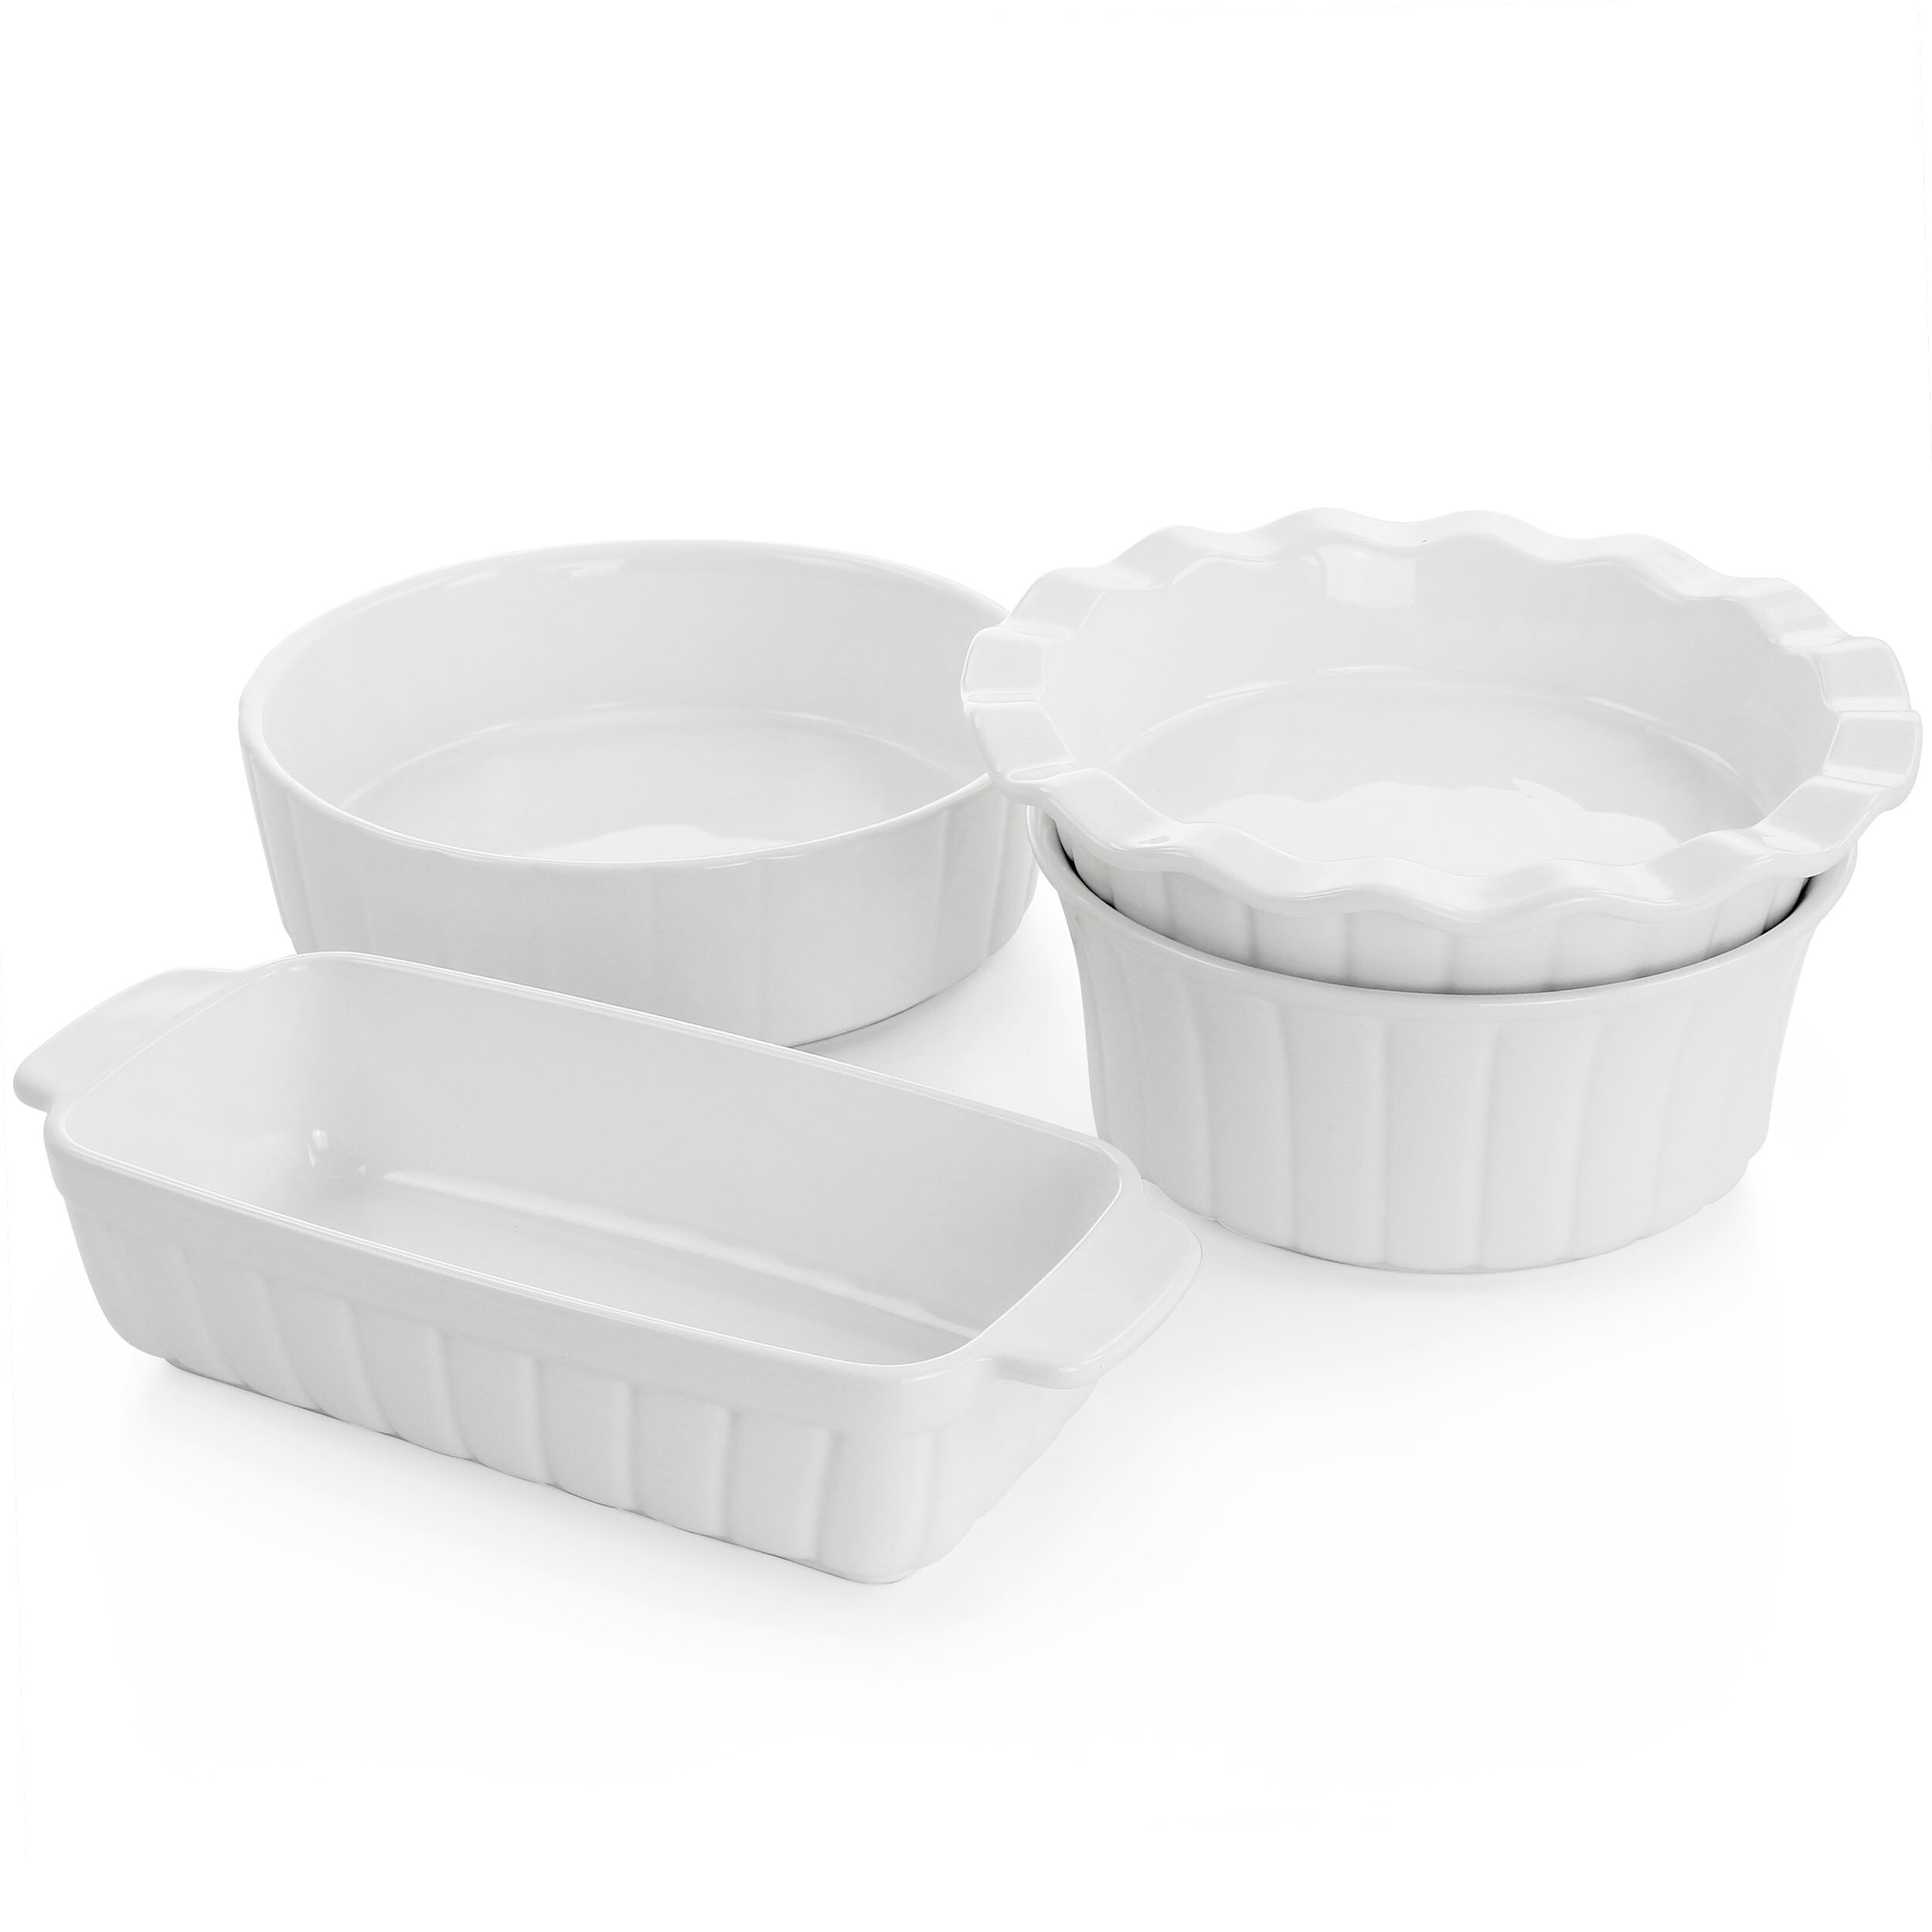 https://ak1.ostkcdn.com/images/products/is/images/direct/2c3979b2f82d9a3f5c7be7f14e8c8c2ec0cea16a/Gibson-Elite-Stoneware-Gracious-Dining-4-Piece-Bakeware-Set-in-White.jpg